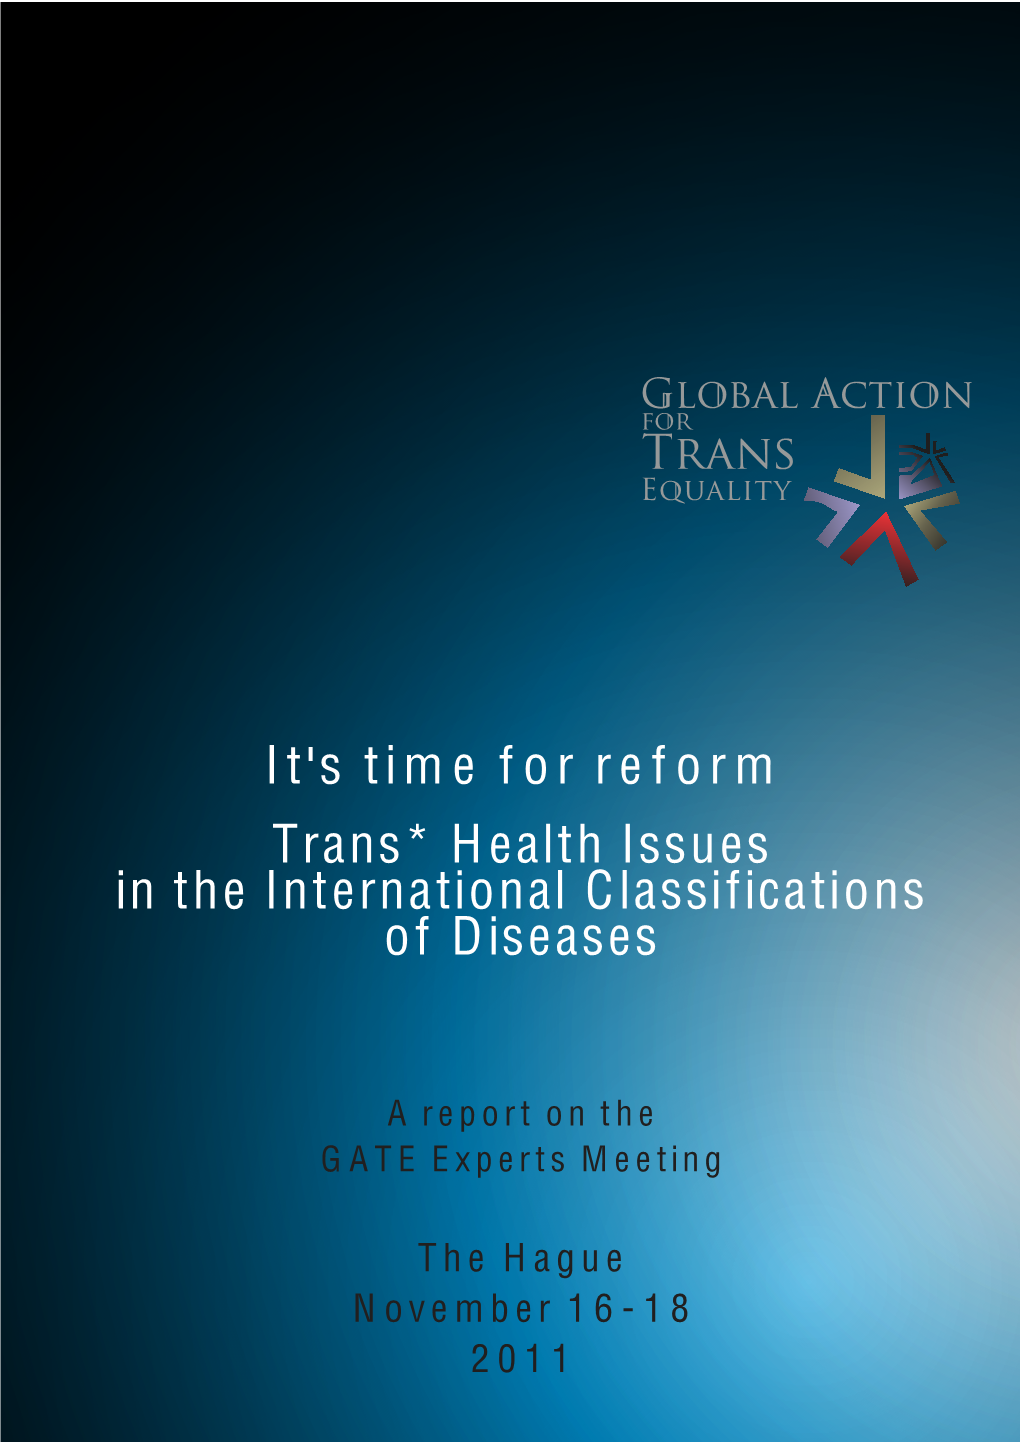 It's Time for Reform Trans* Health Issues in the International Classifications of Diseases